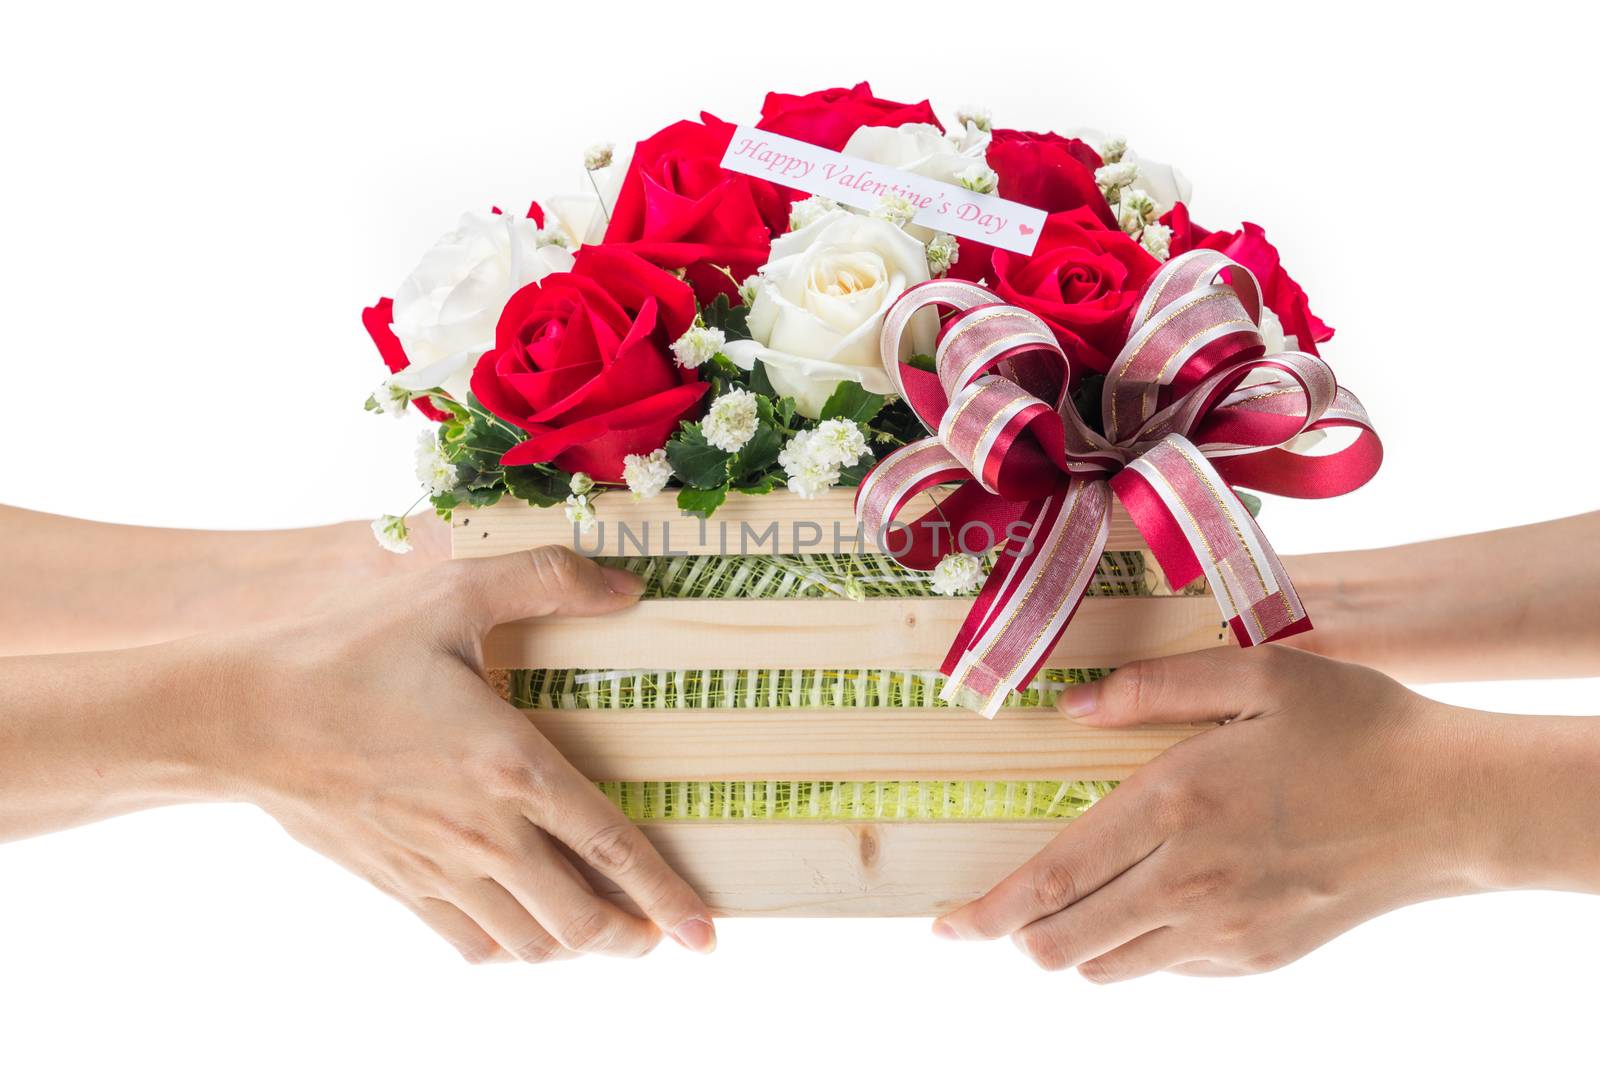 Hand delivers baskets of red and white rose flowers by iamway